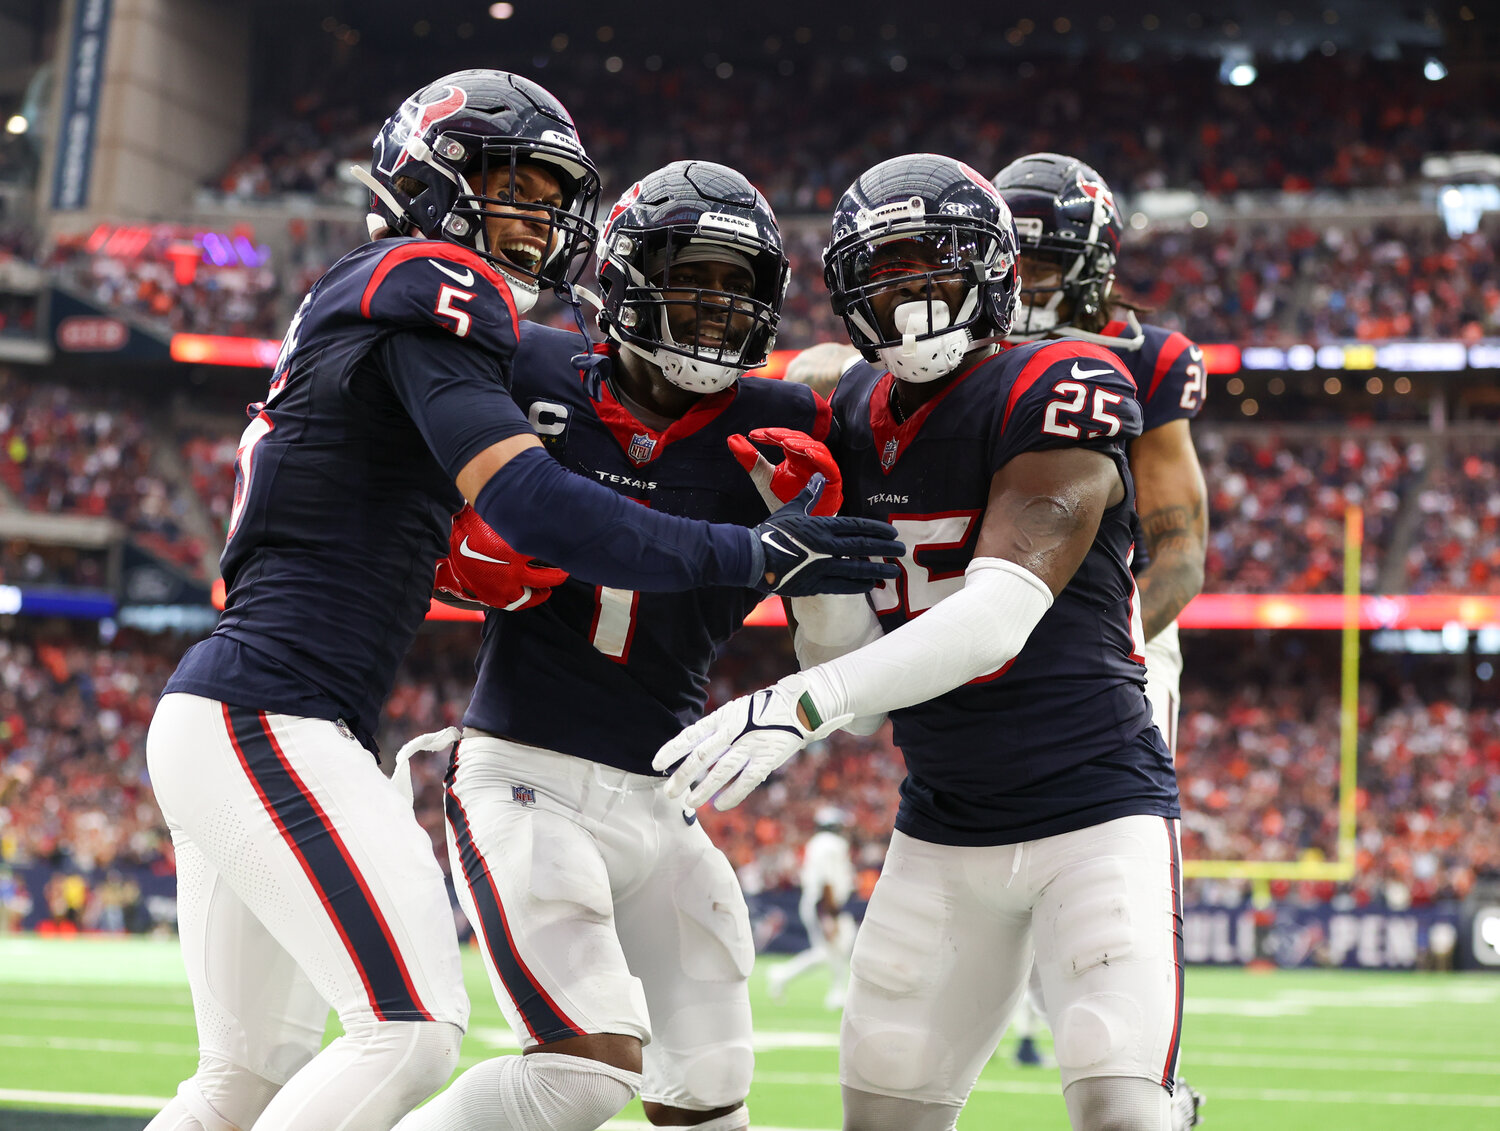 Texans safety Jalen Pitre (5) and cornerback Desmond King II (25) celebrate with safety Jimmie Ward (1) after Ward made an interception in the end zone in the final seconds of the game to secure a 22-17 win over the Broncos in an NFL game on December 3, 2023 in Houston.